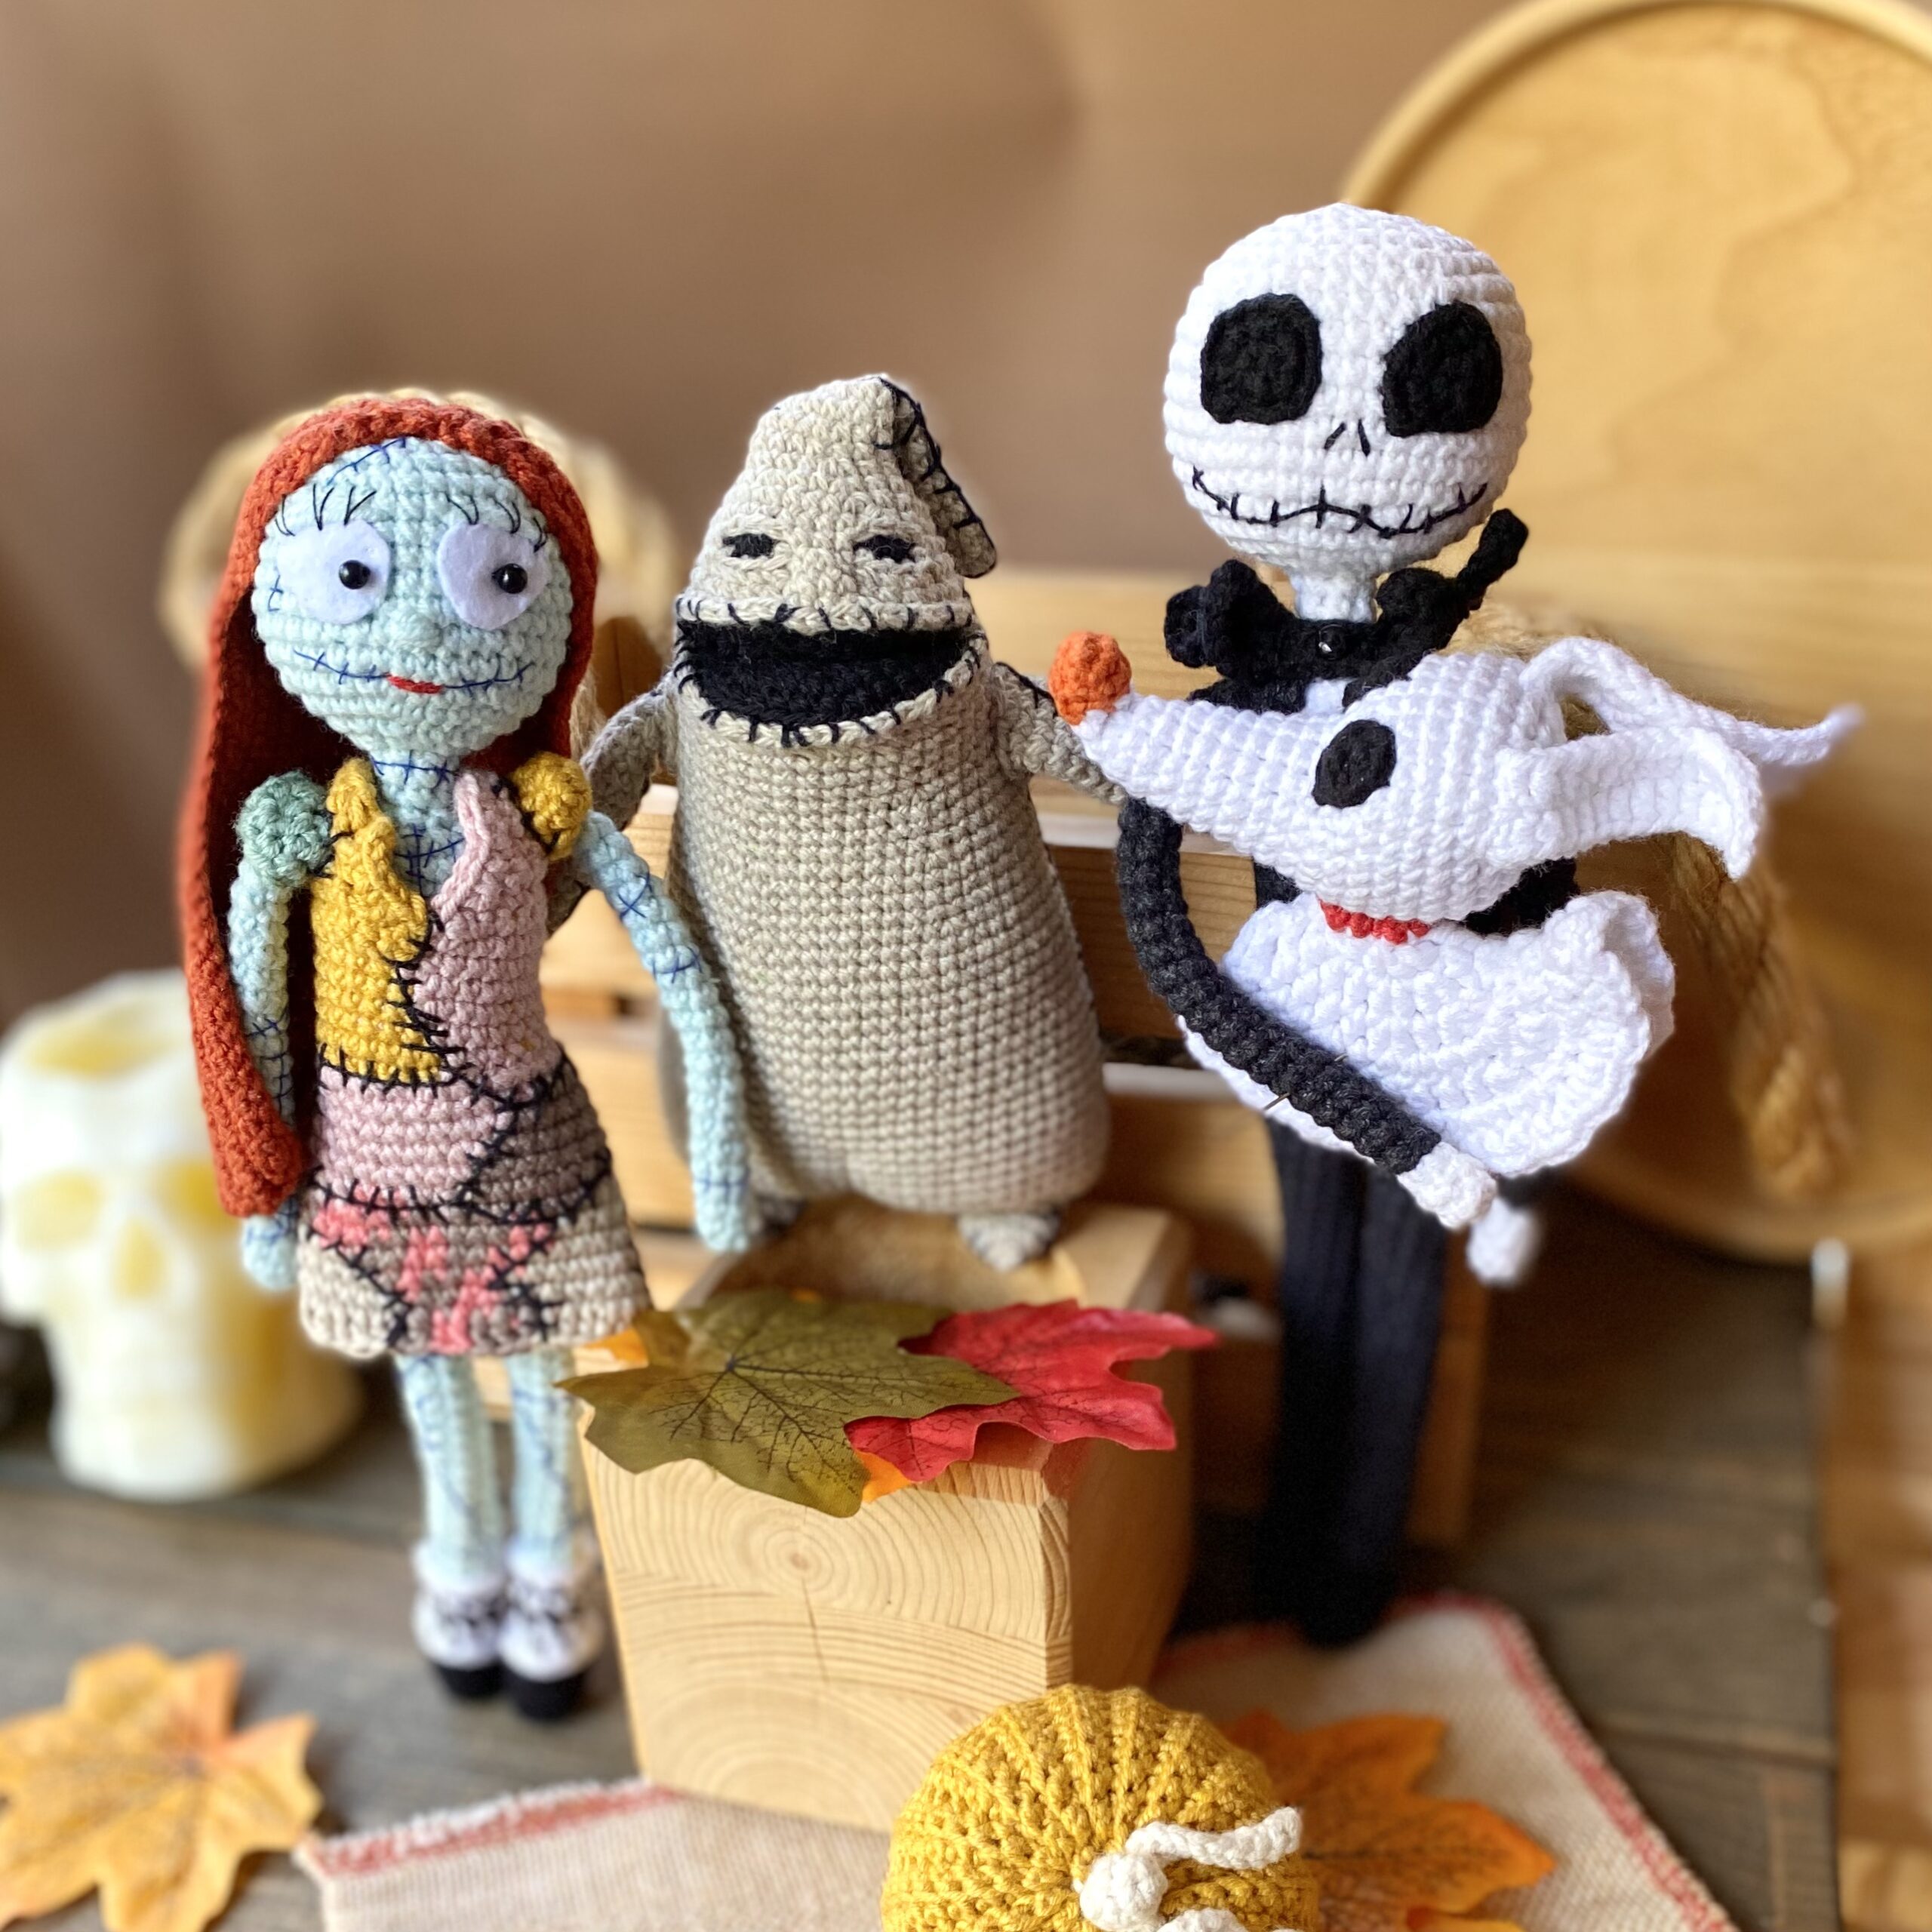 Nightmare before Christmas Crochet-a-long and Unboxing 